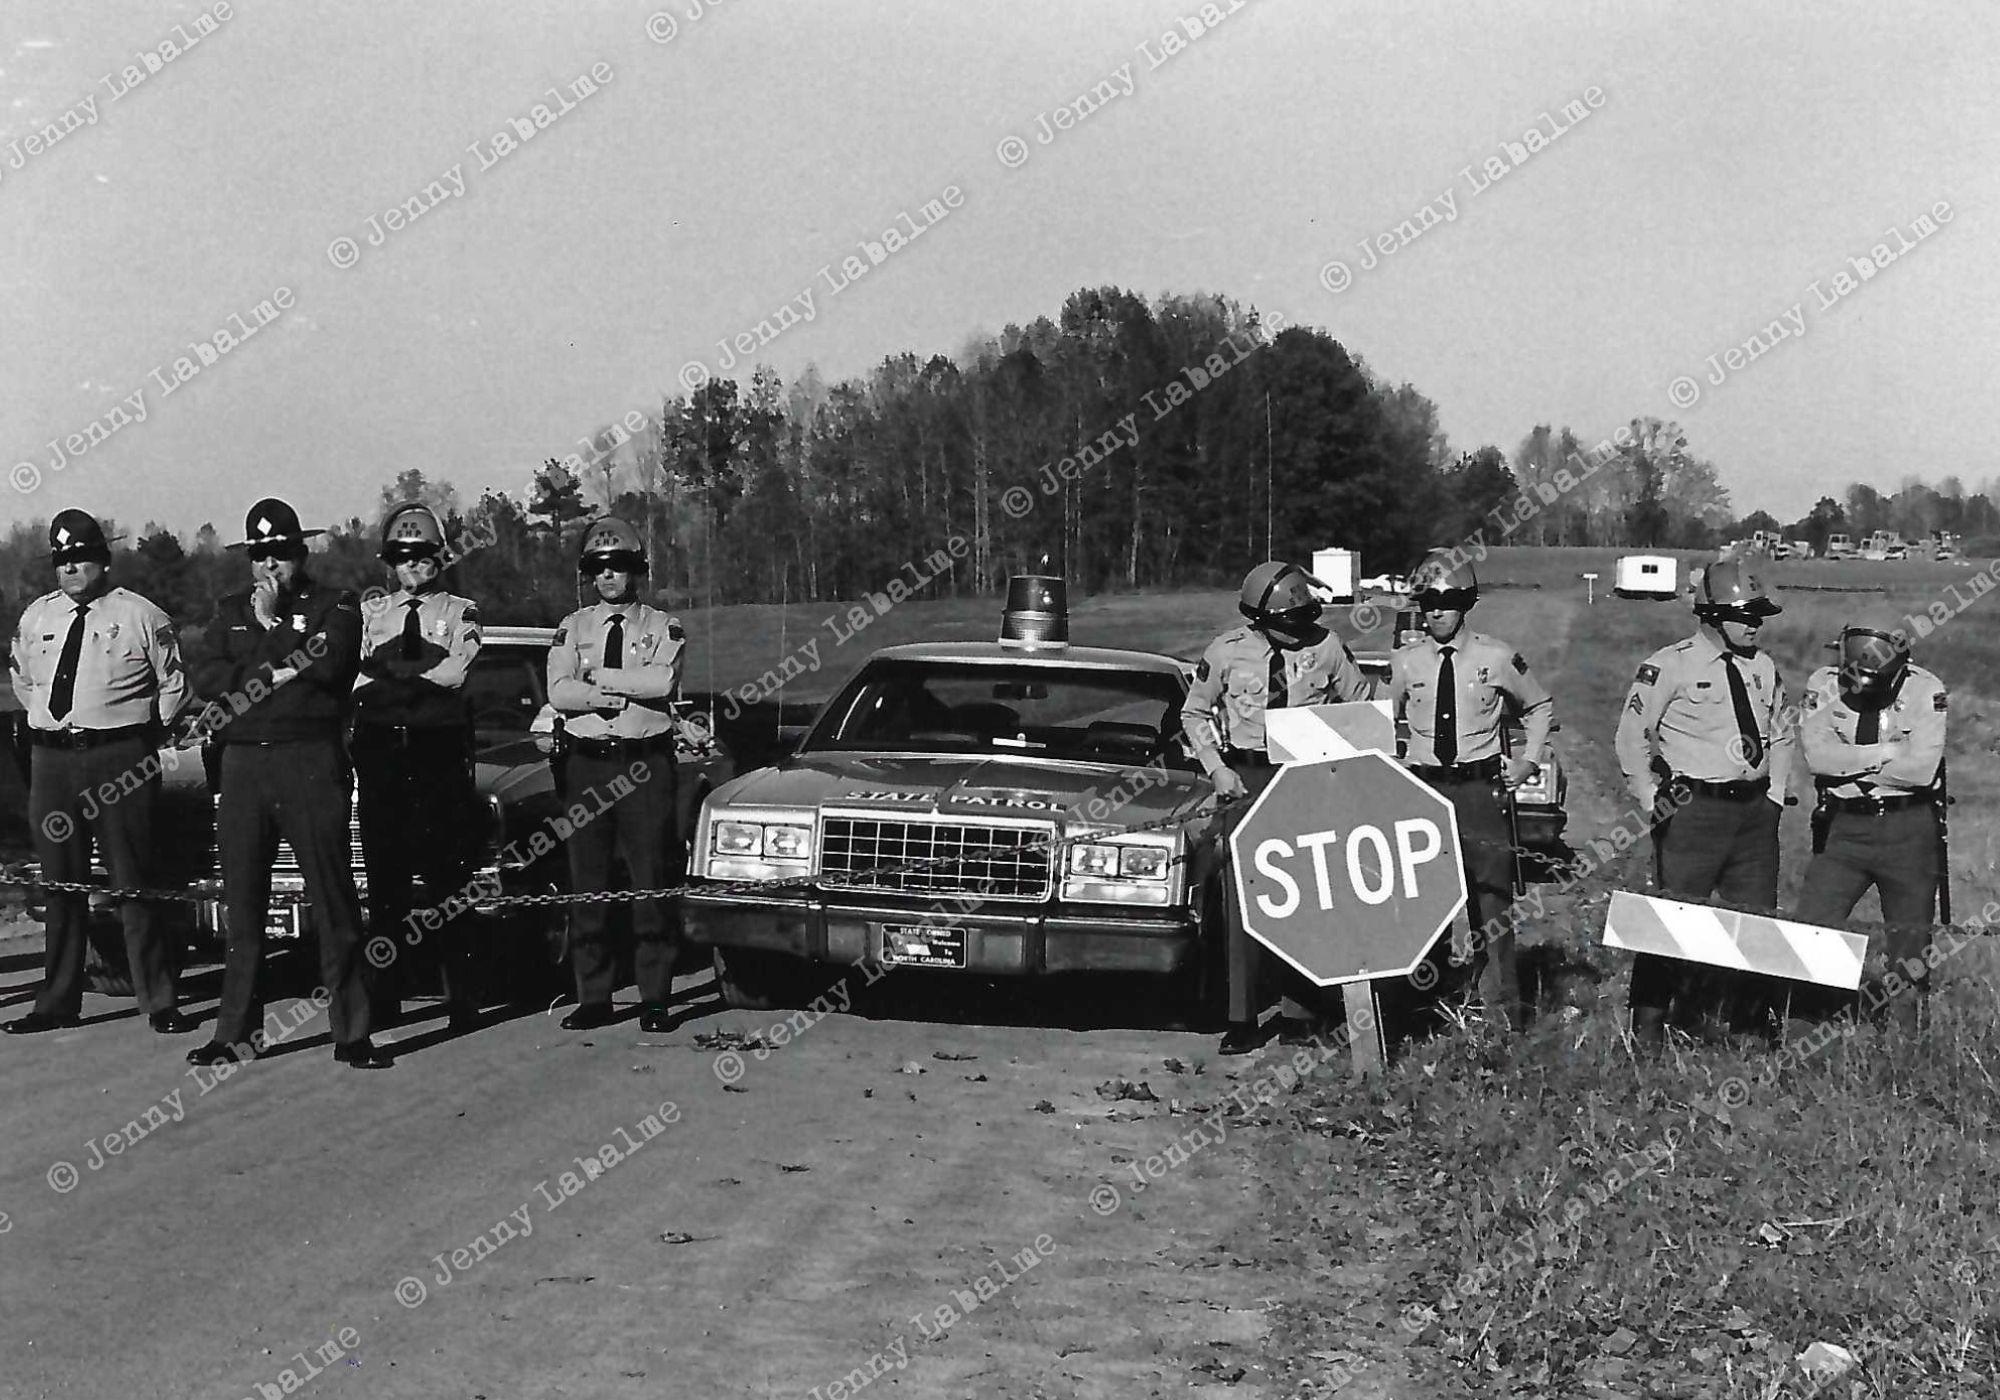 These state troopers blocked daily protesters at the entrance to the Warren County landfill